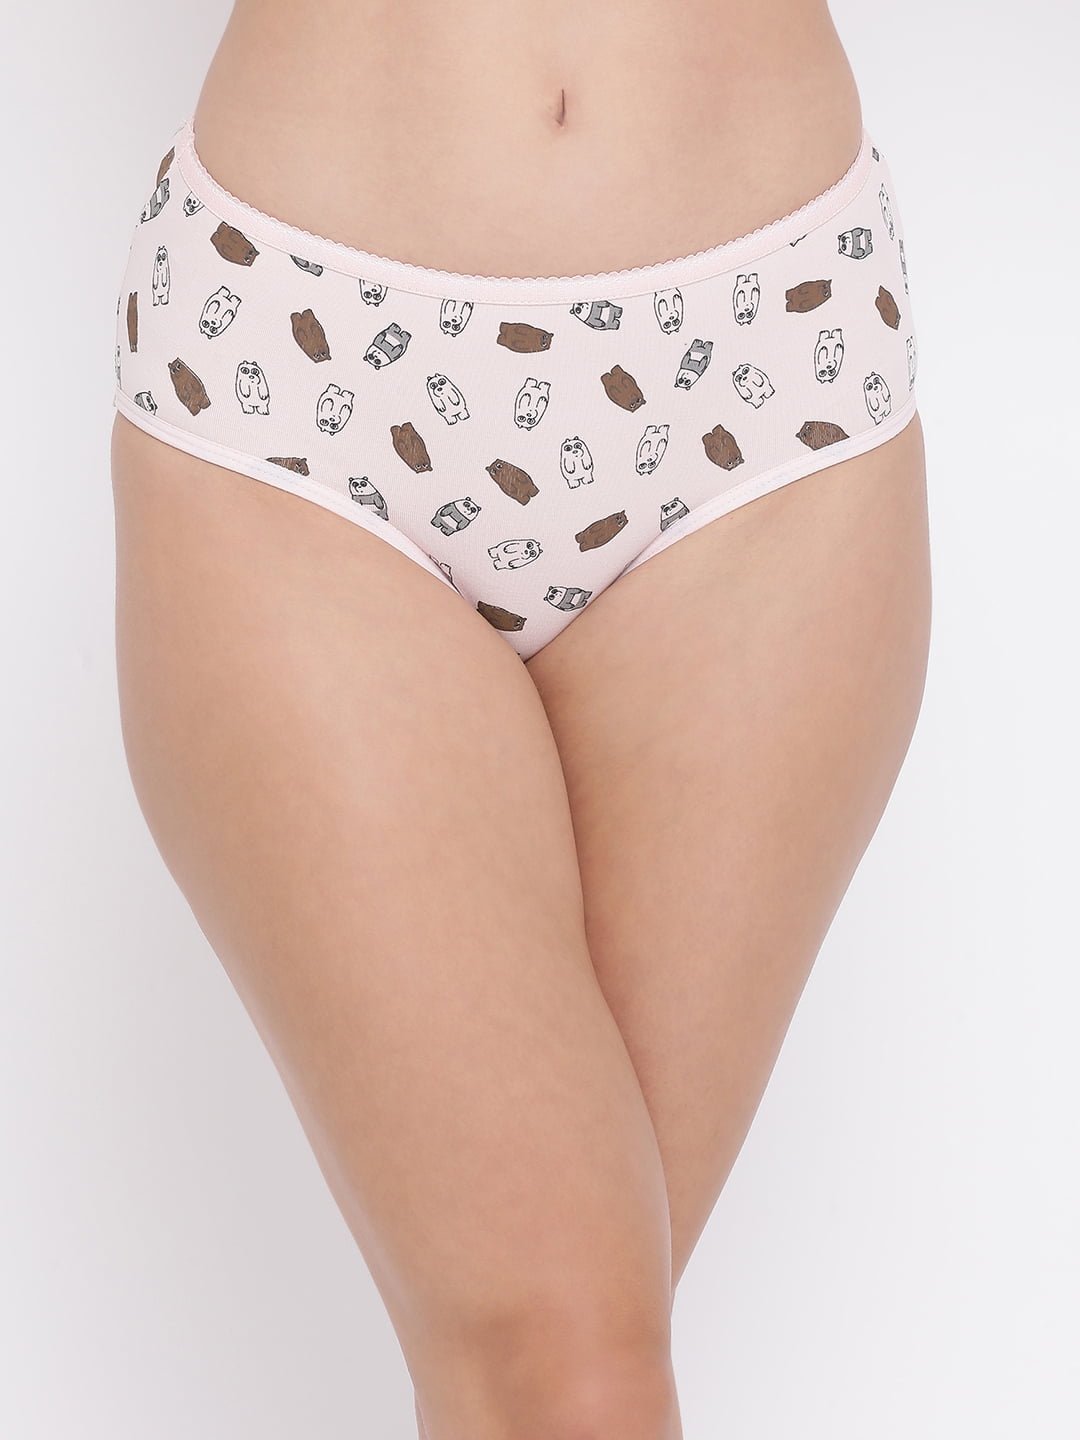 Clovia - Cute & Comfy 🥰 Cotton hipster panties that are super soft &  breathable Shop 4 for 499:  #underfashion